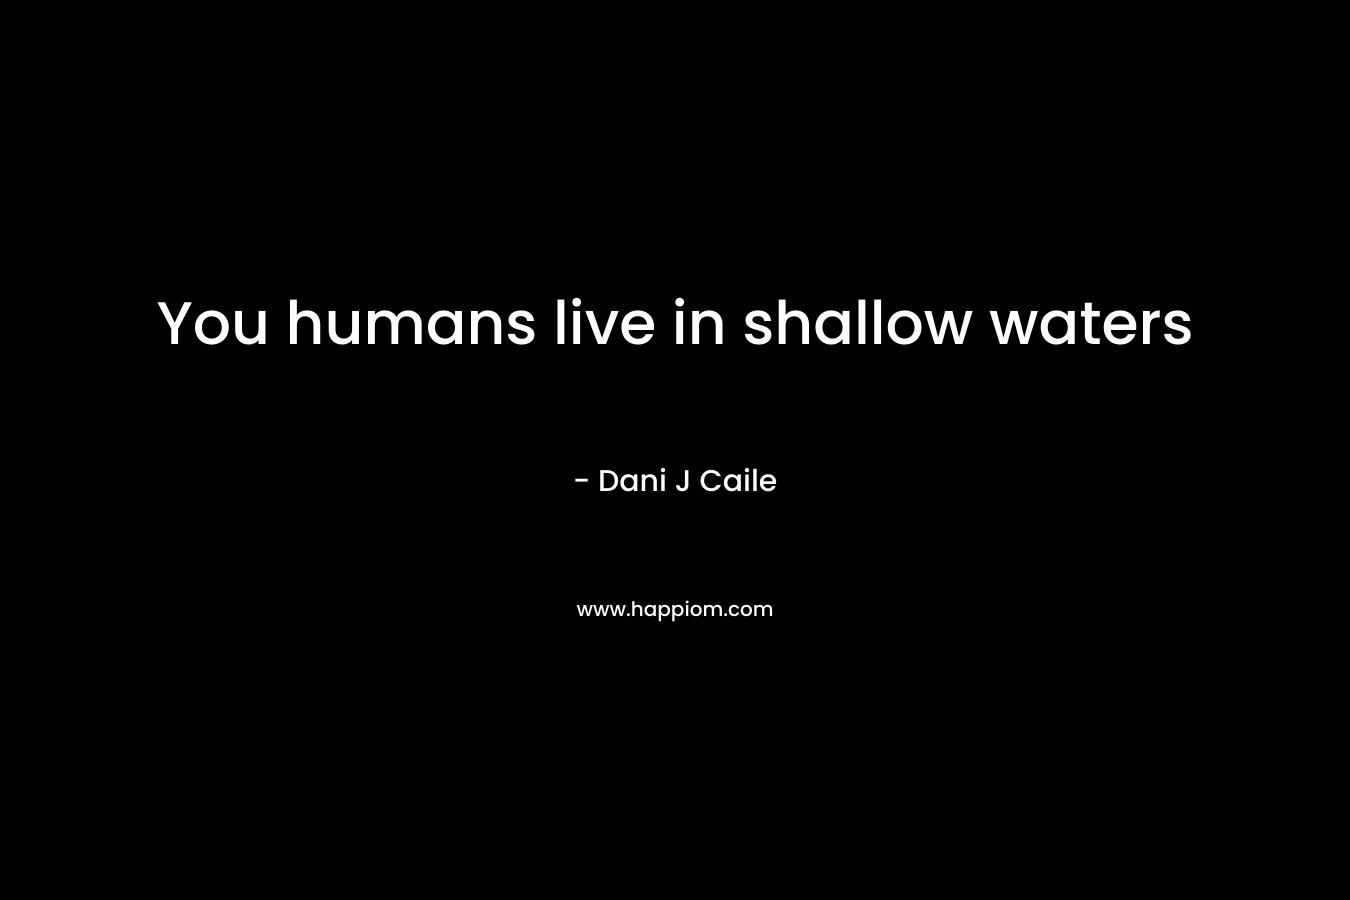 You humans live in shallow waters